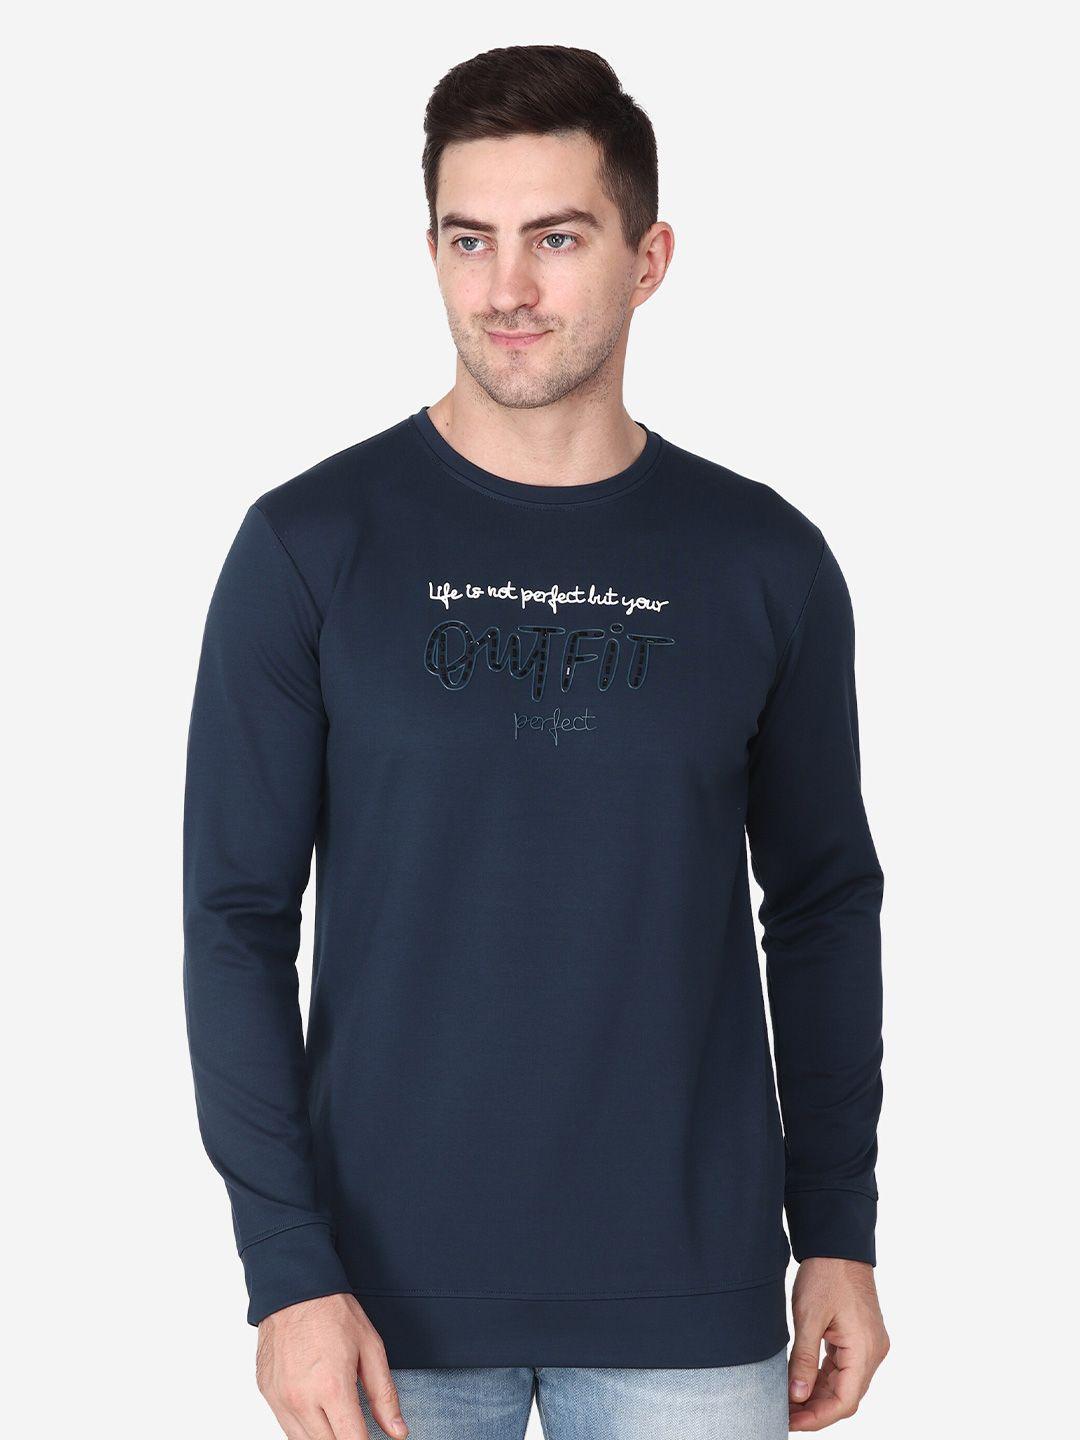 albion-typography-printed-pure-cotton-pullover